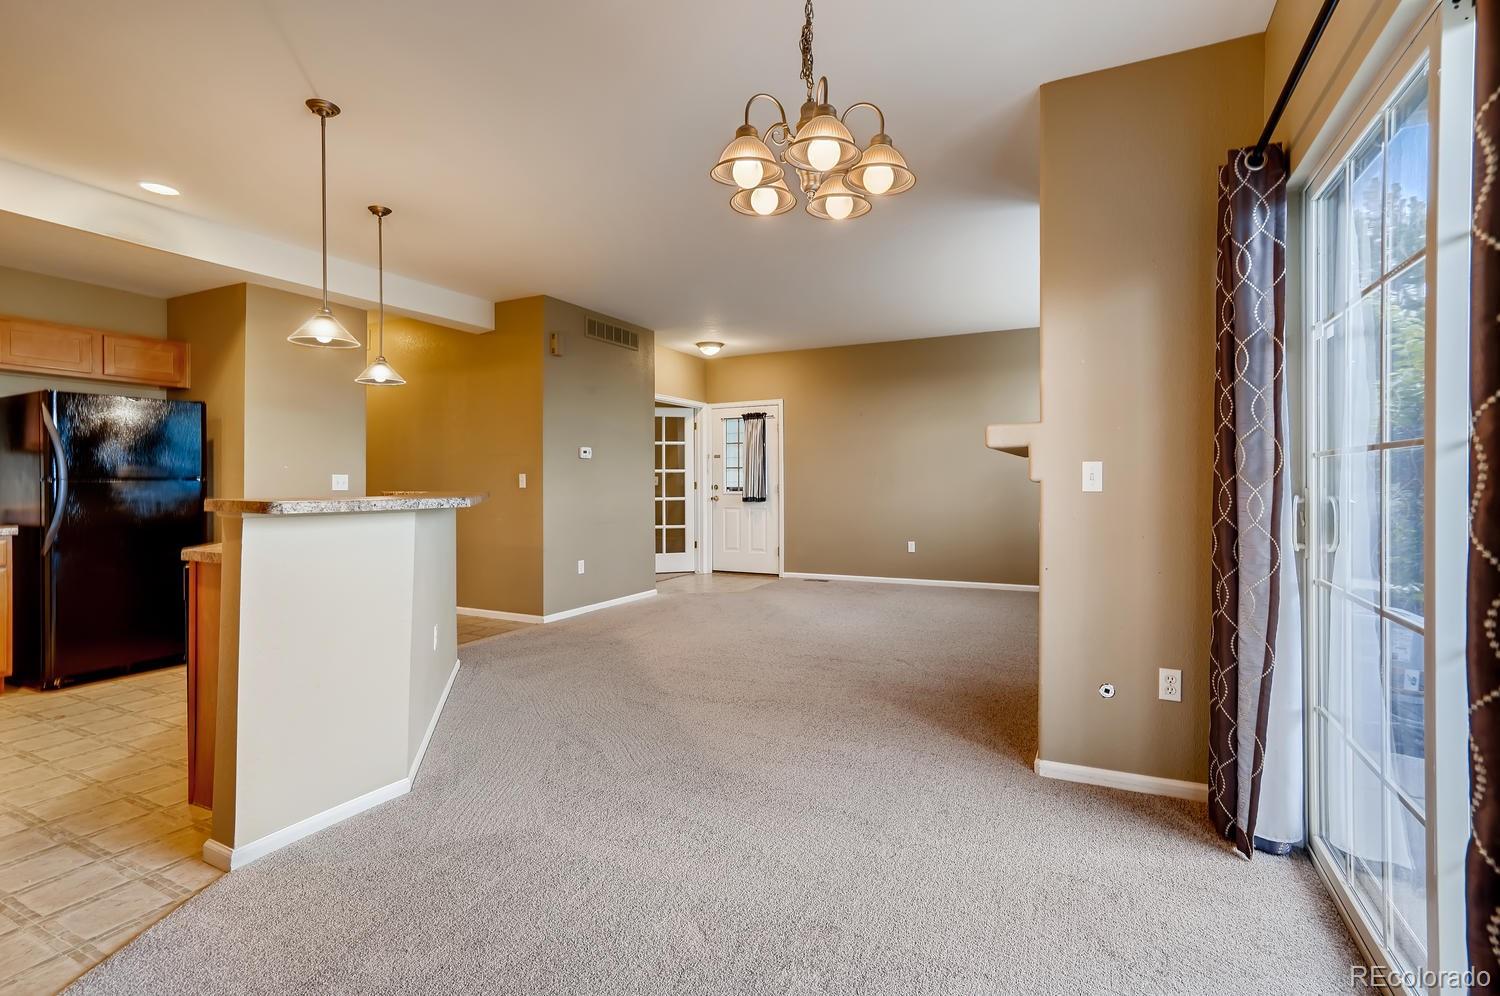 2552 82nd, Westminster, CO